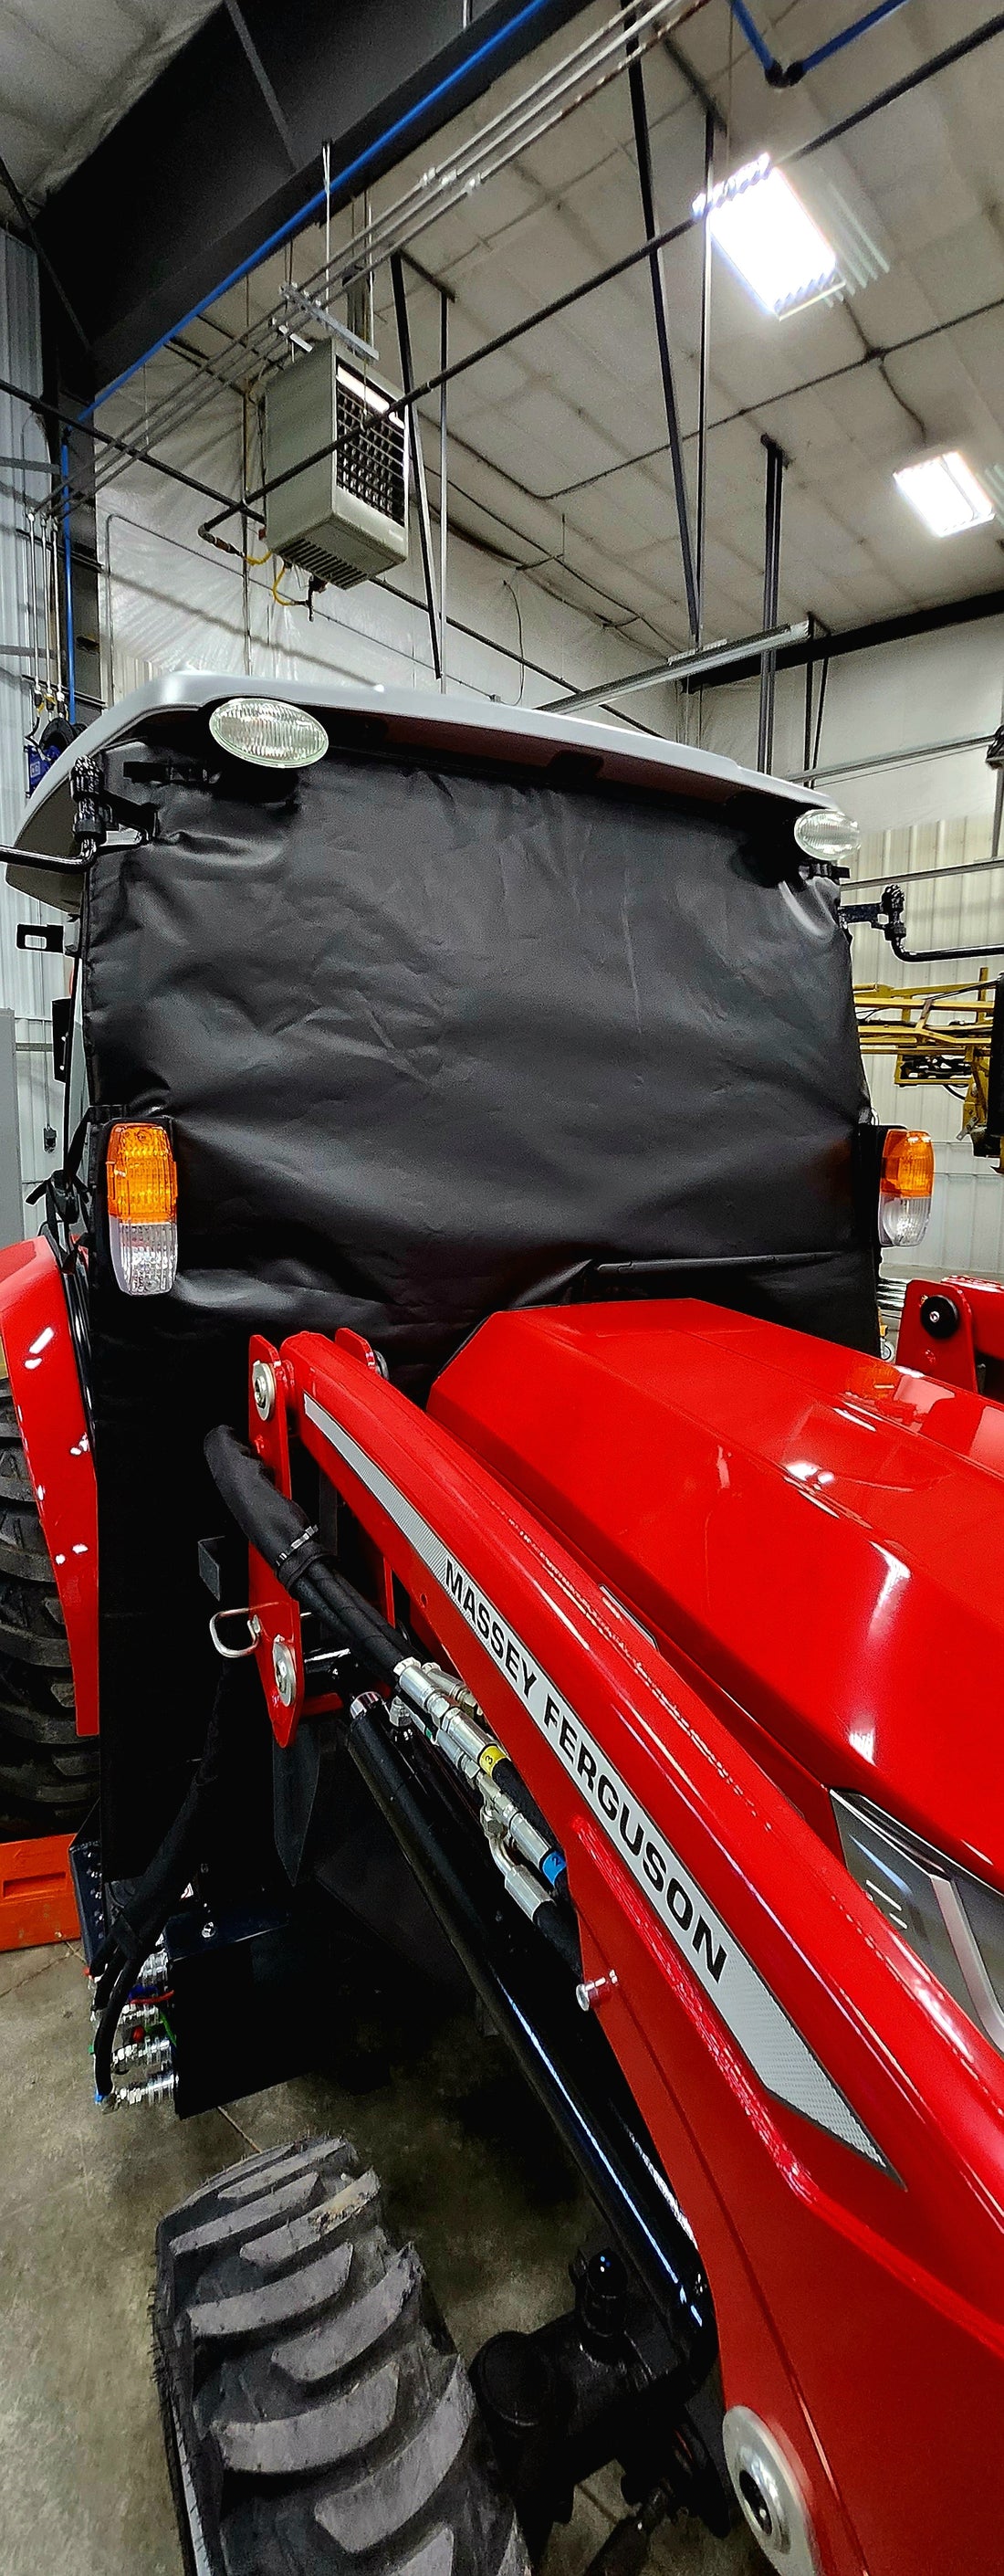 Tractor/Loader Transport Windshield Protection Universal Compatible with Massey (And other brand) Medium Sized 50"W x 58"L